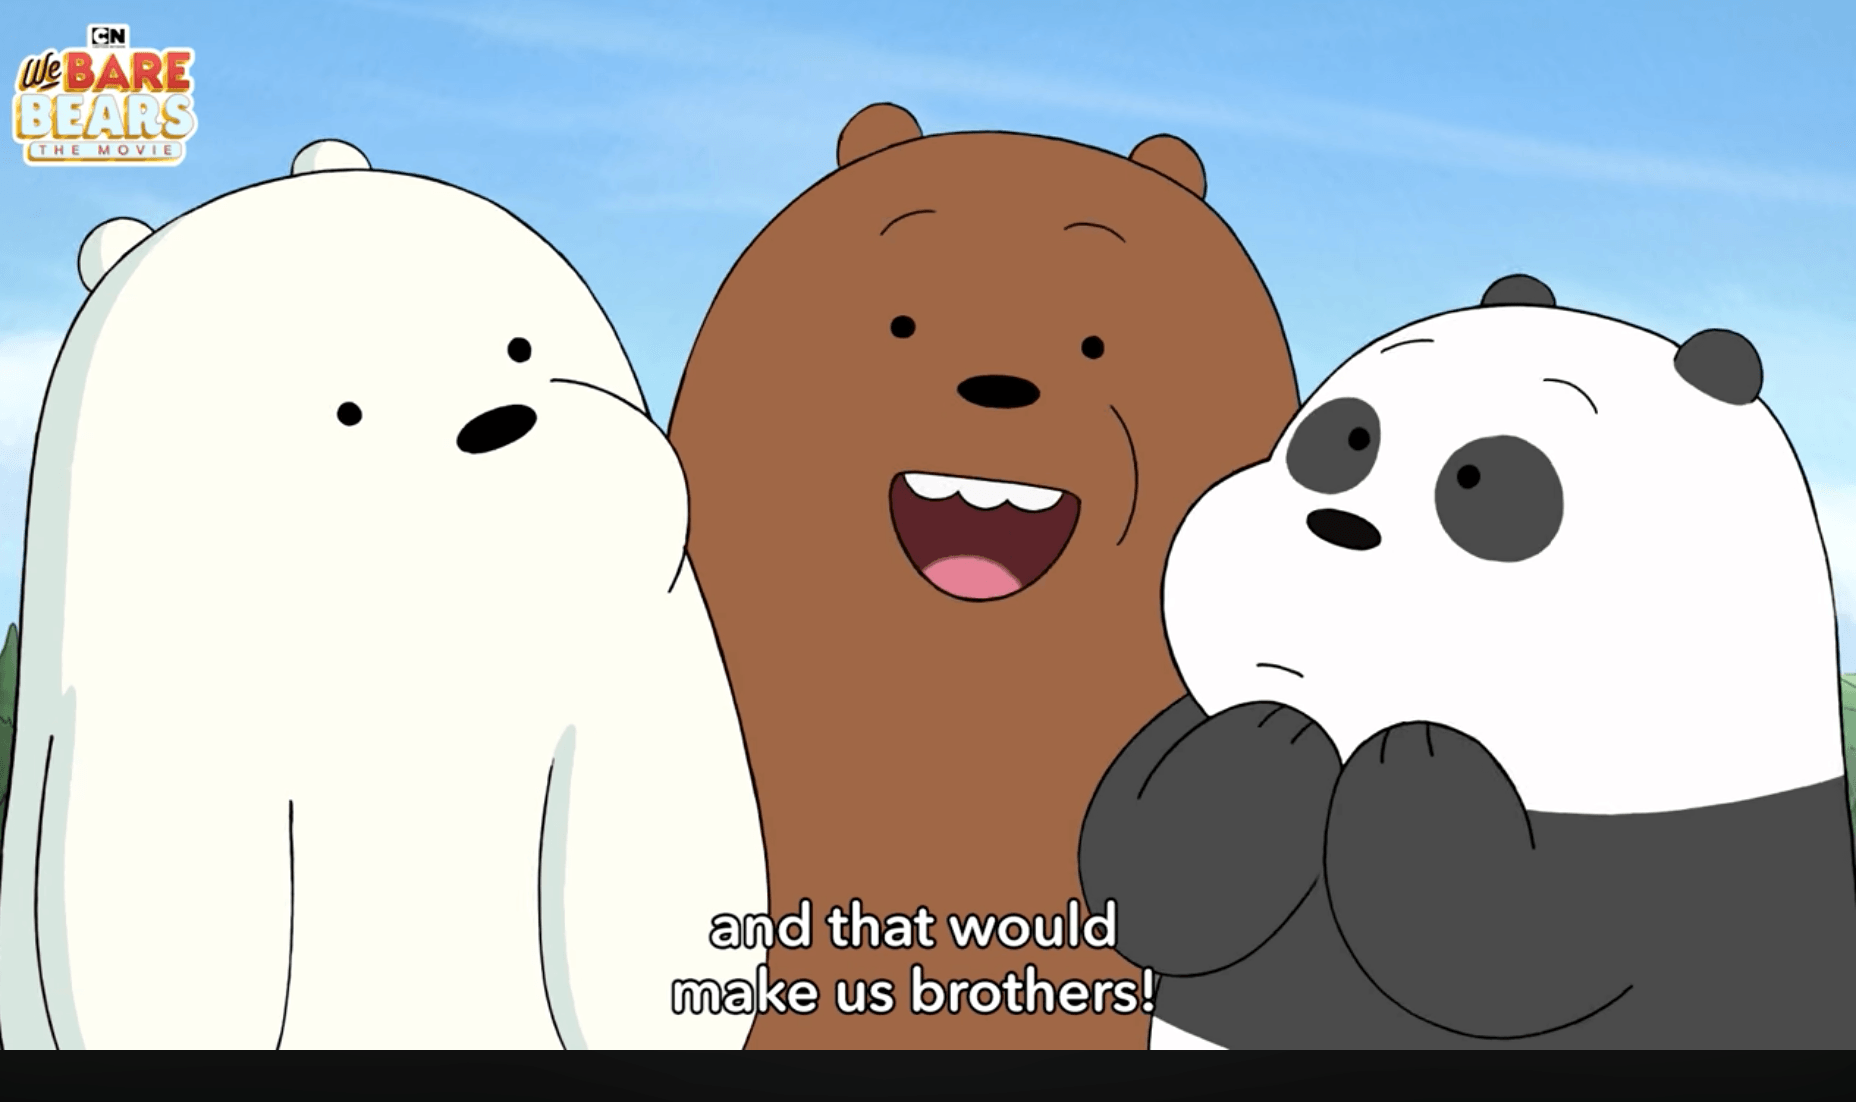 ‘We Bare Bears’ movie to premiere in September 2020